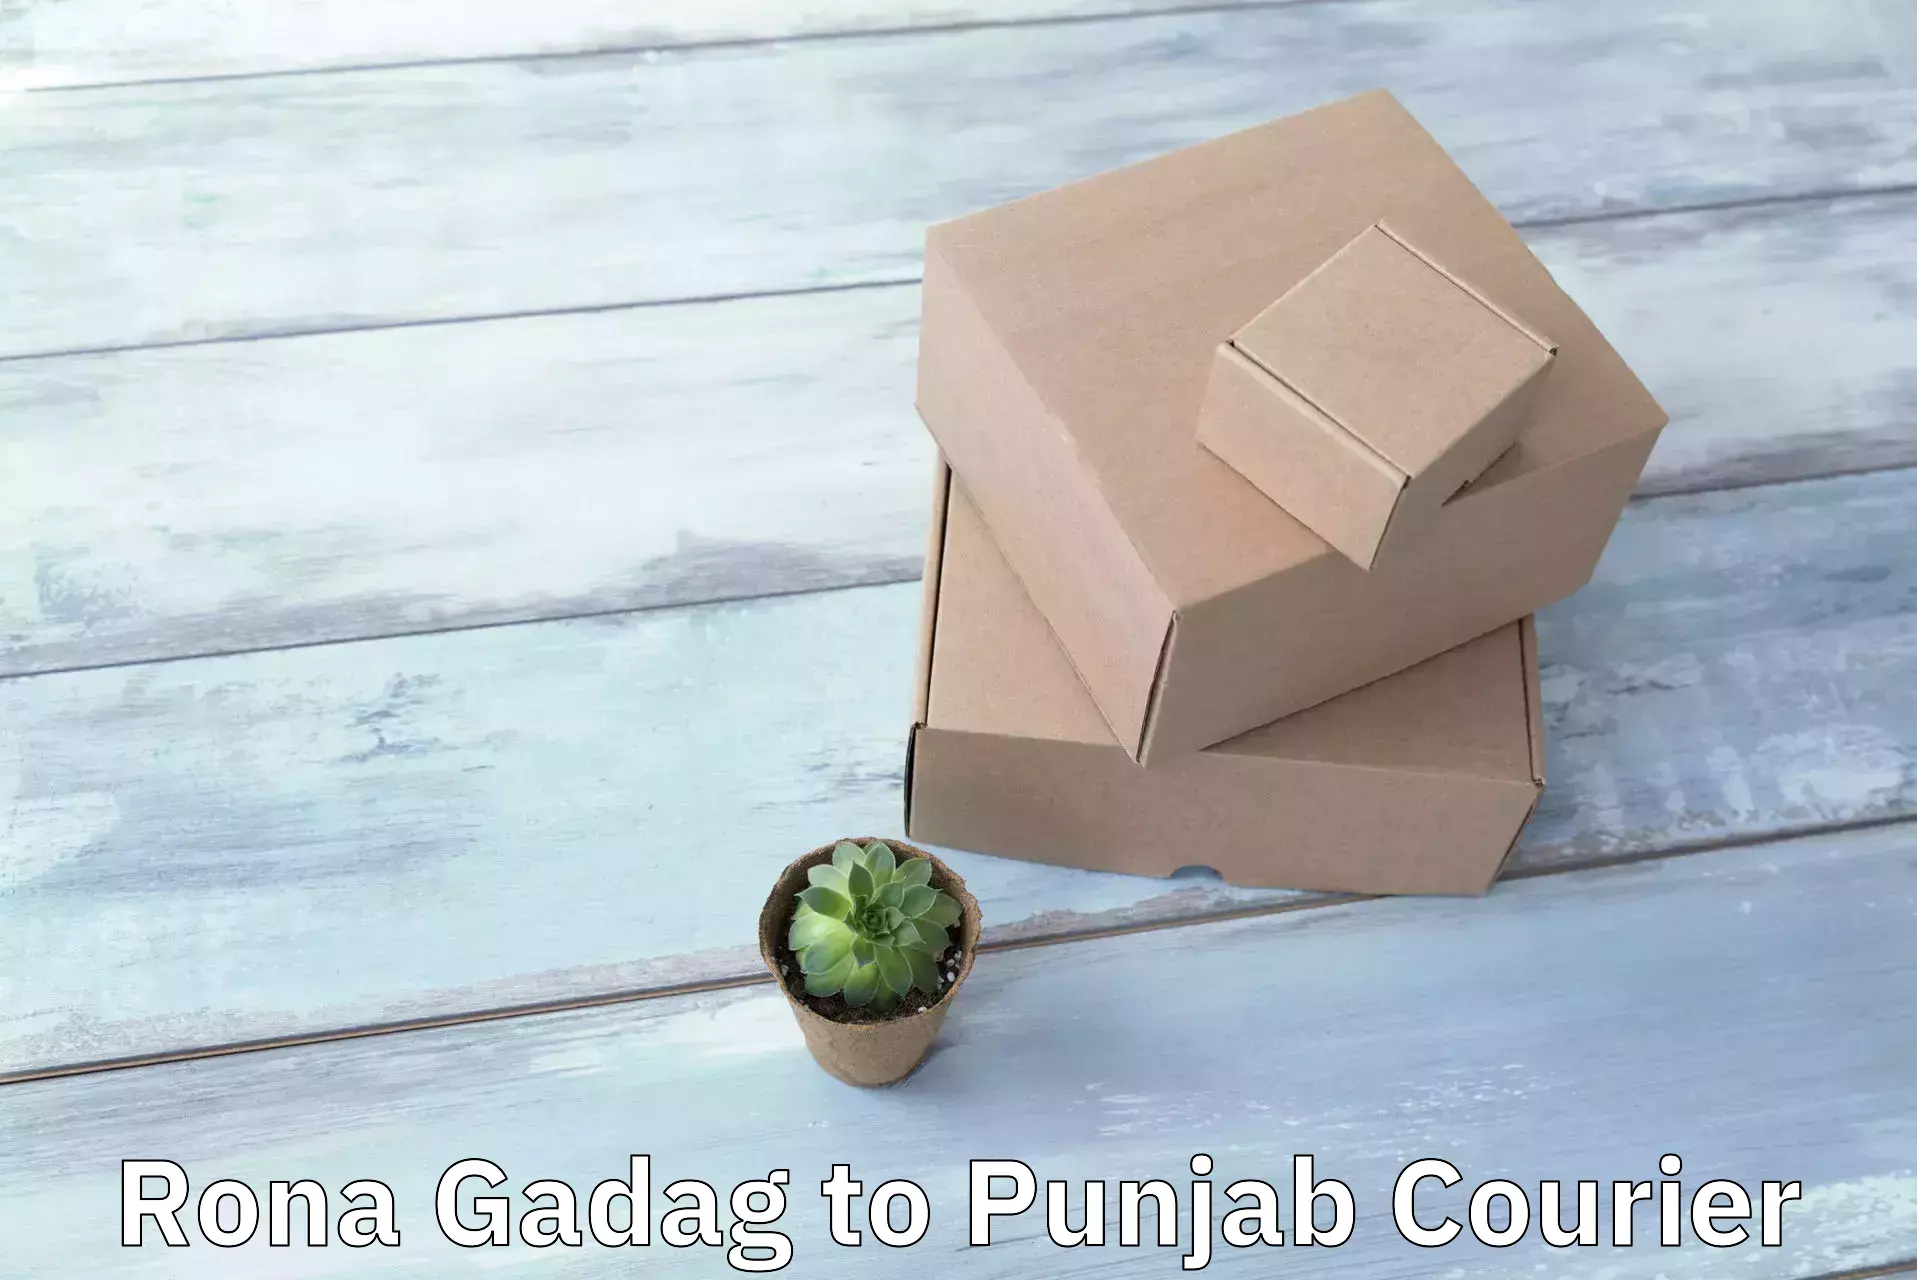 Professional courier handling Rona Gadag to Patiala